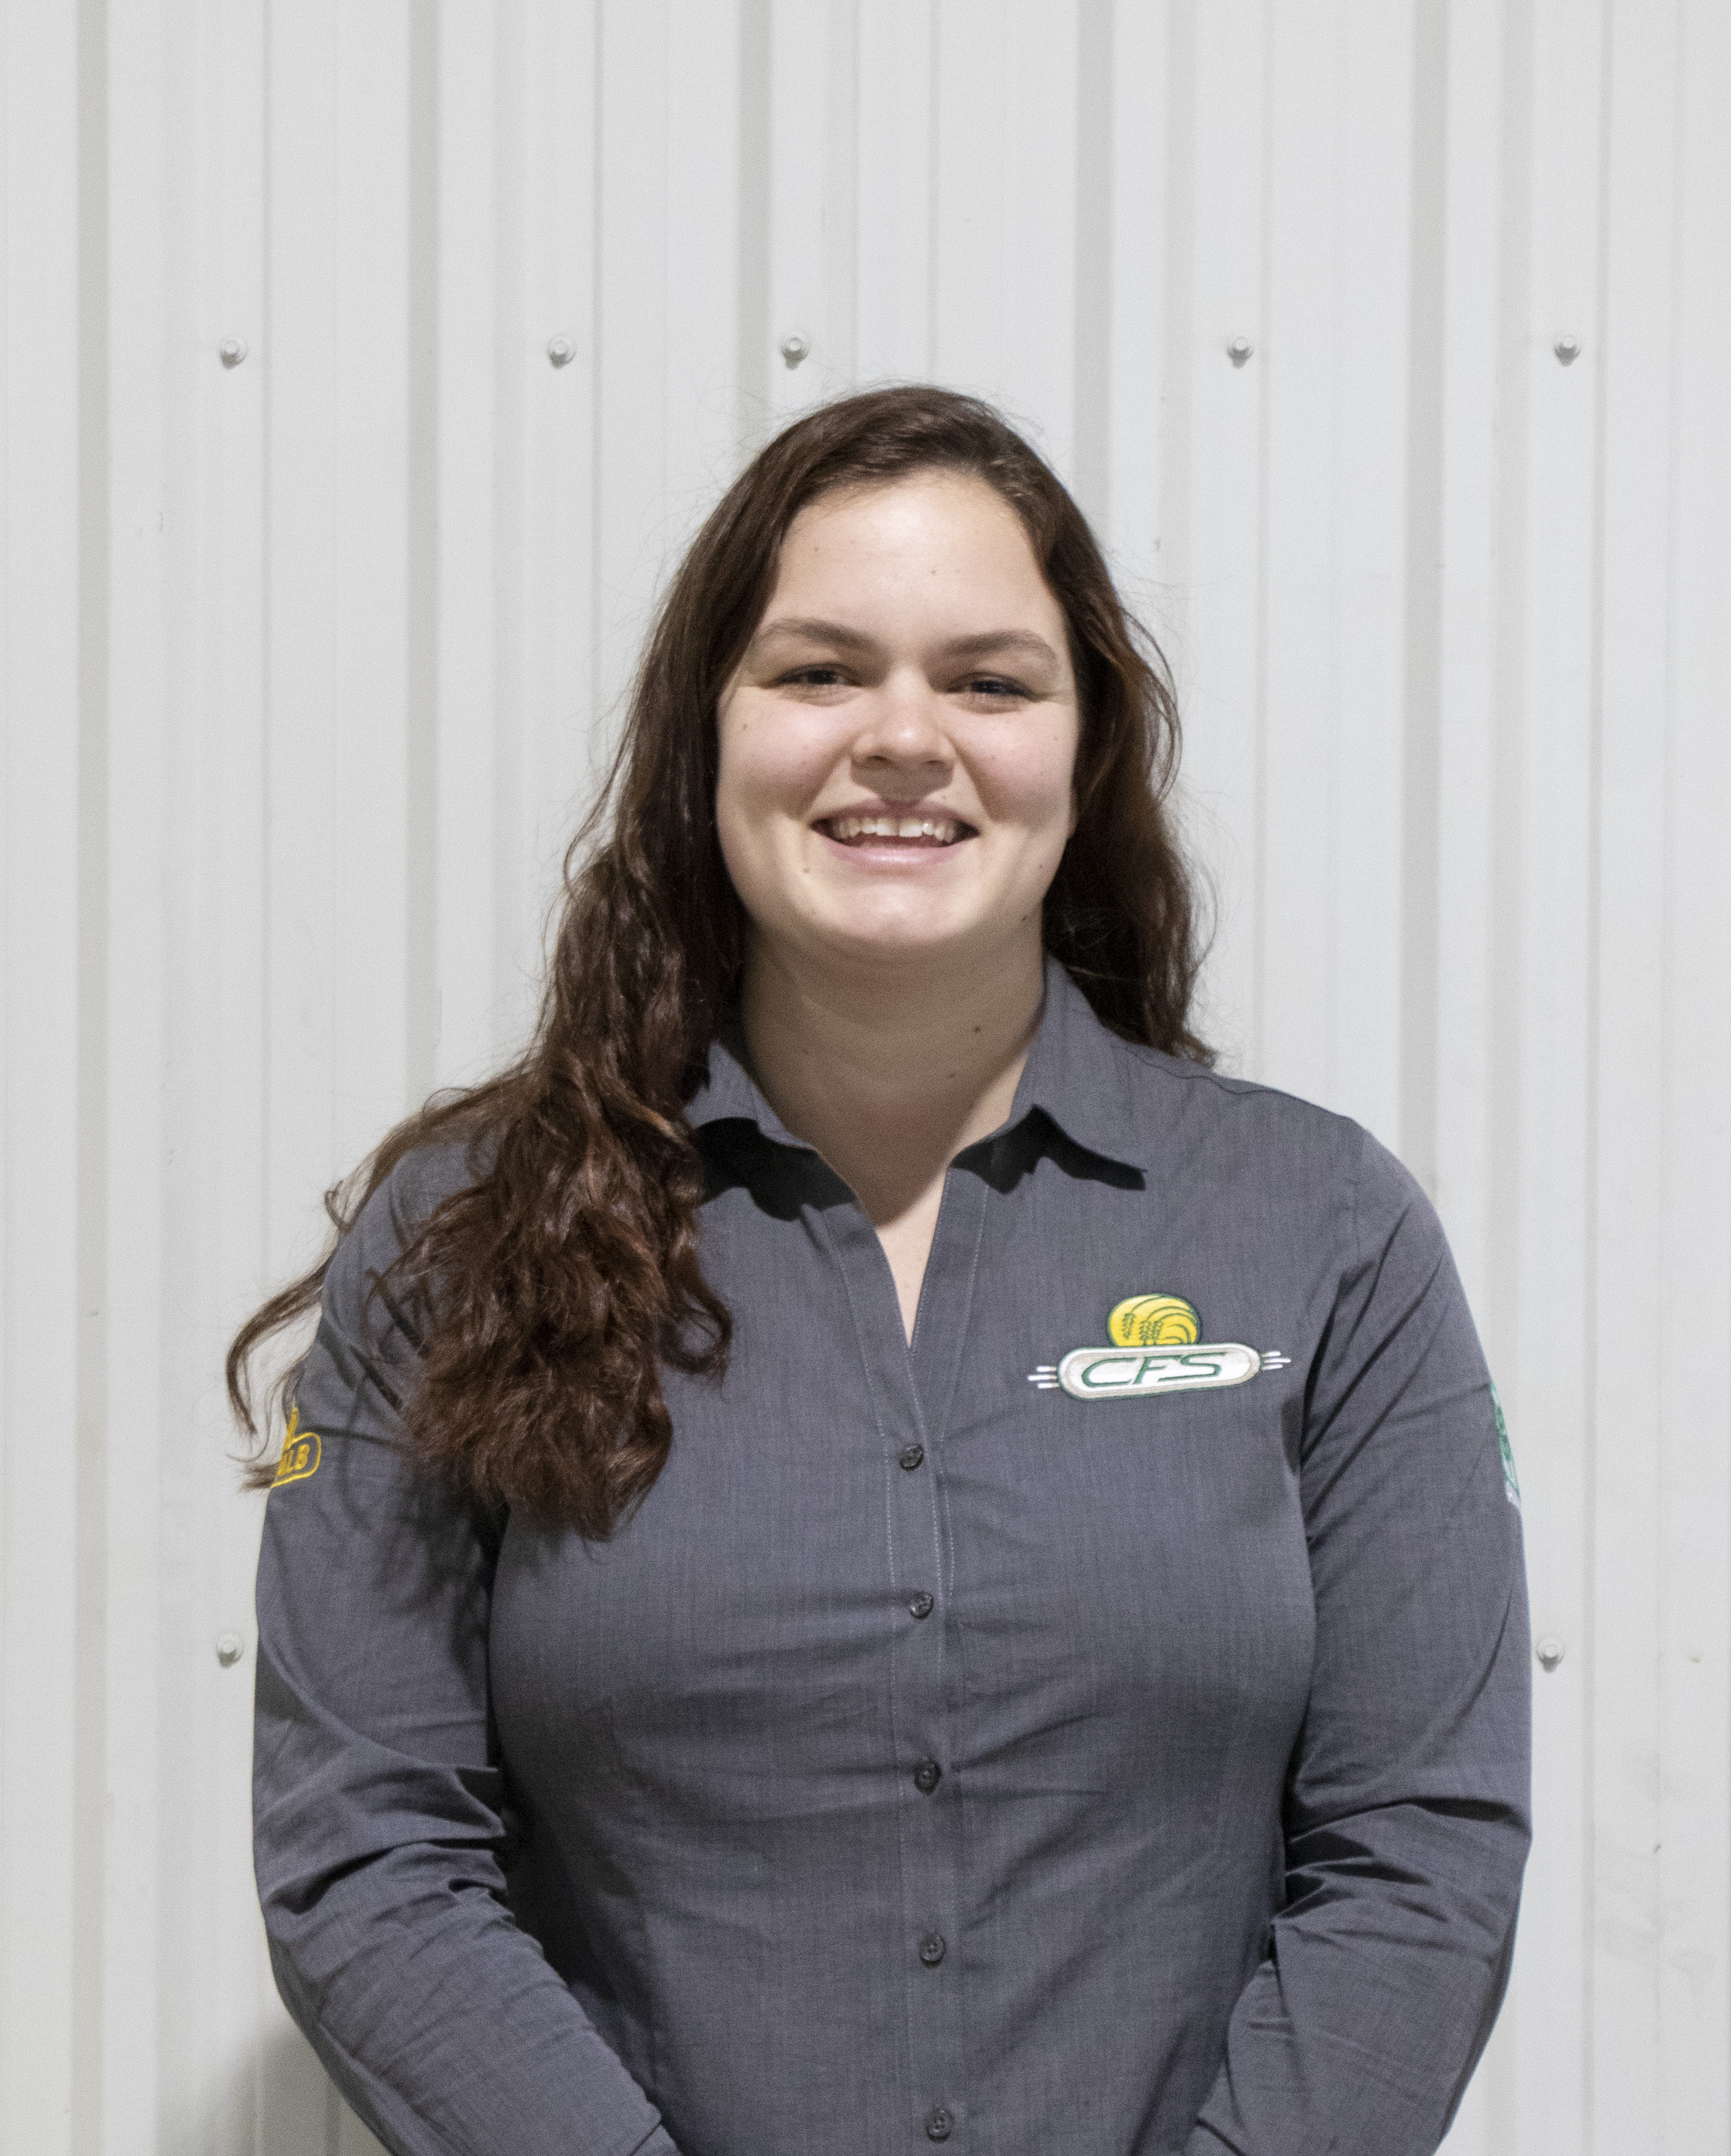 Lauren GoodSales and Service
Lauren started working at CFS as a crop scout in the summers of 2017. She left to continue her education in Olds Alberta and gather further work experience. She is a graduate from University of Guelph Ridgetown Campus and has her Bachelor of Applied Science in Agribusiness from Olds College. After moving back to the area, she has returned to CFS excited to assist customers with achieving their cropping goals.